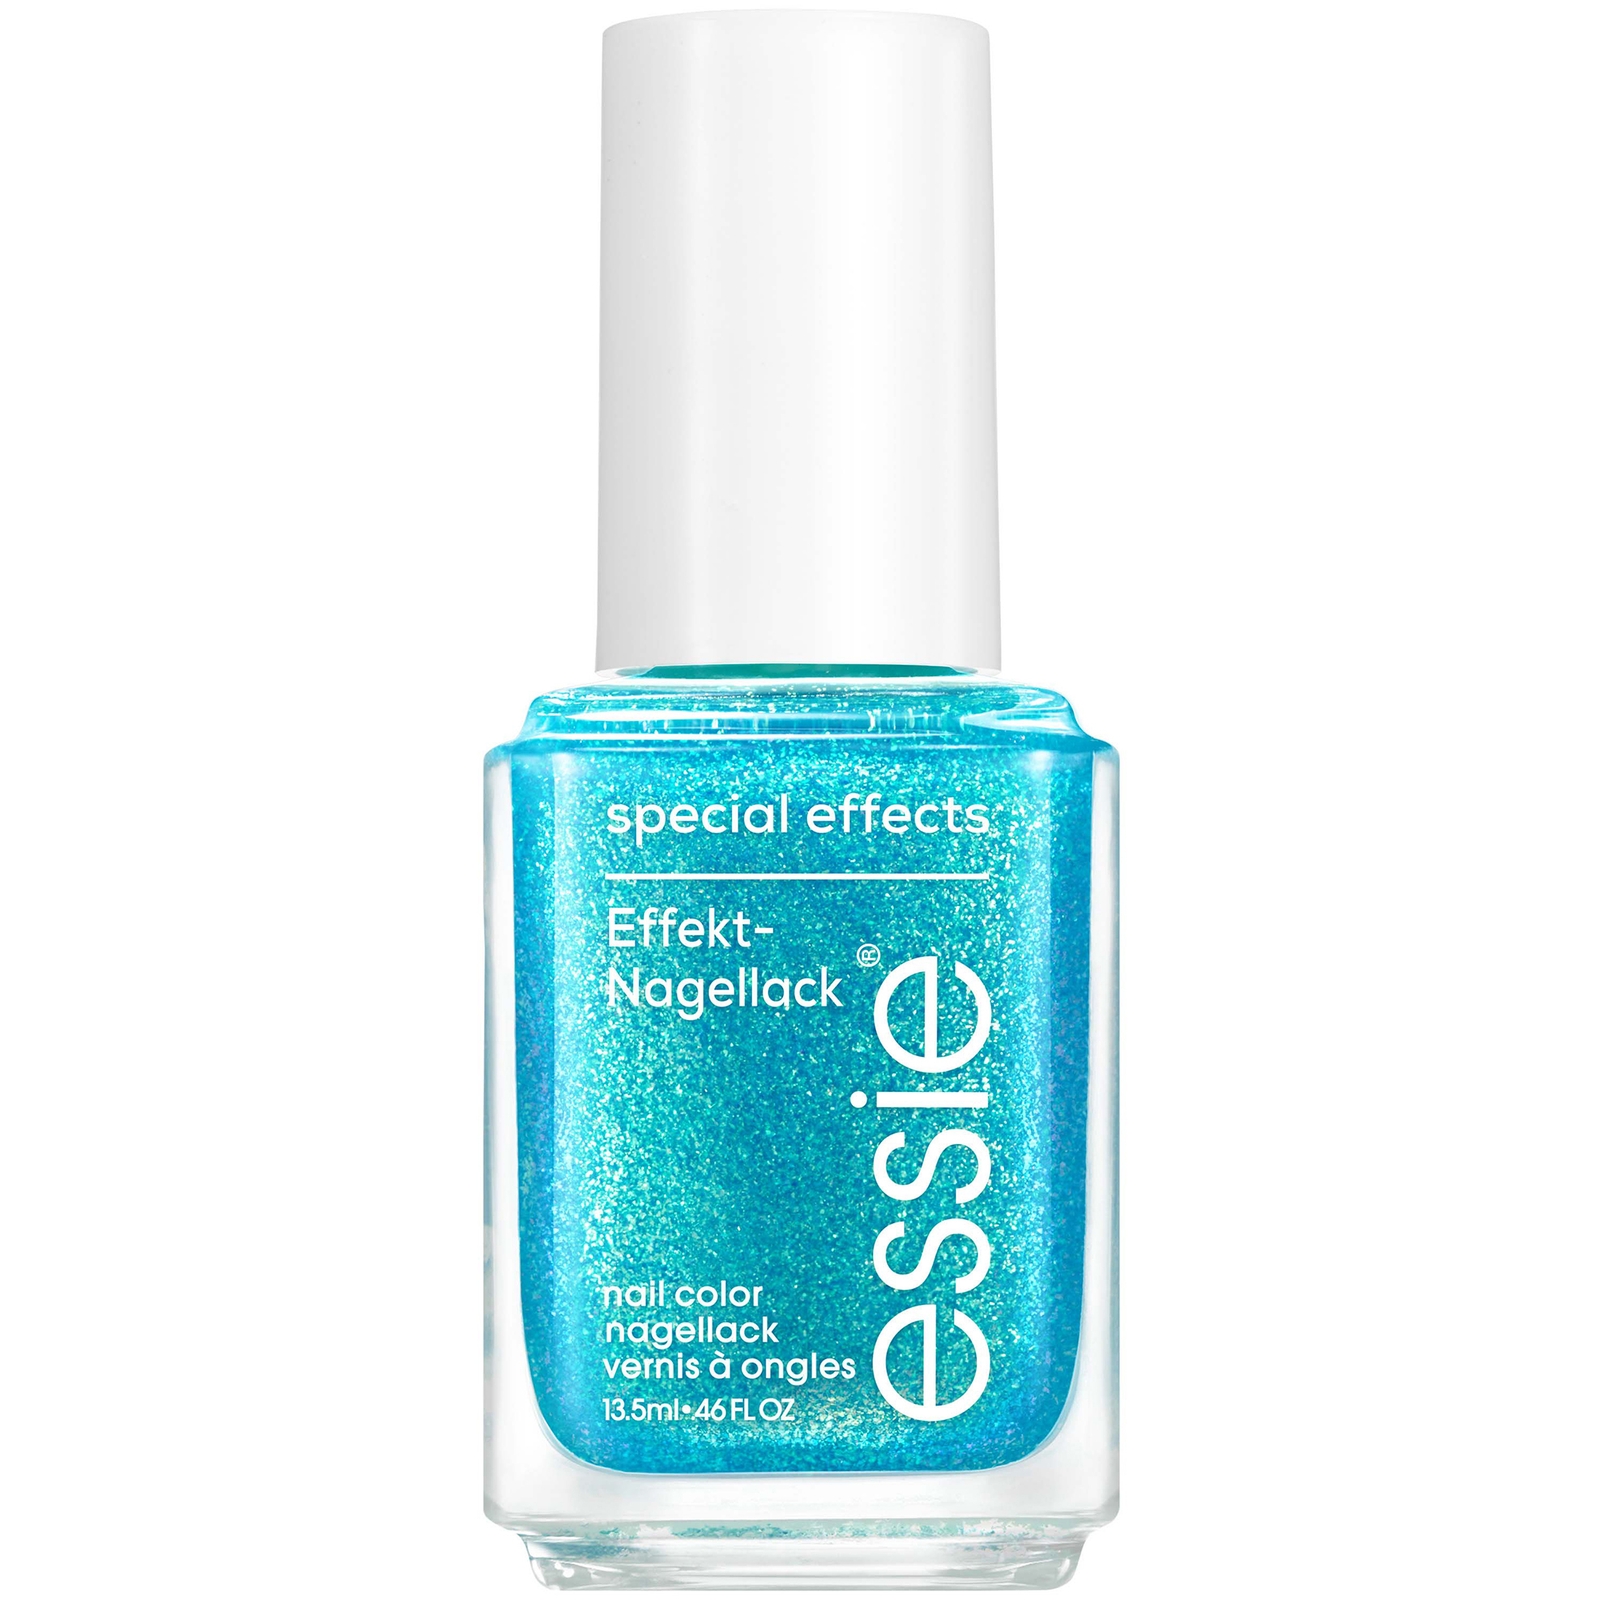 essie Original Nail Art Studio Special Effects Nail Polish Topcoat 13.5ml (Various Shades) - Frosted